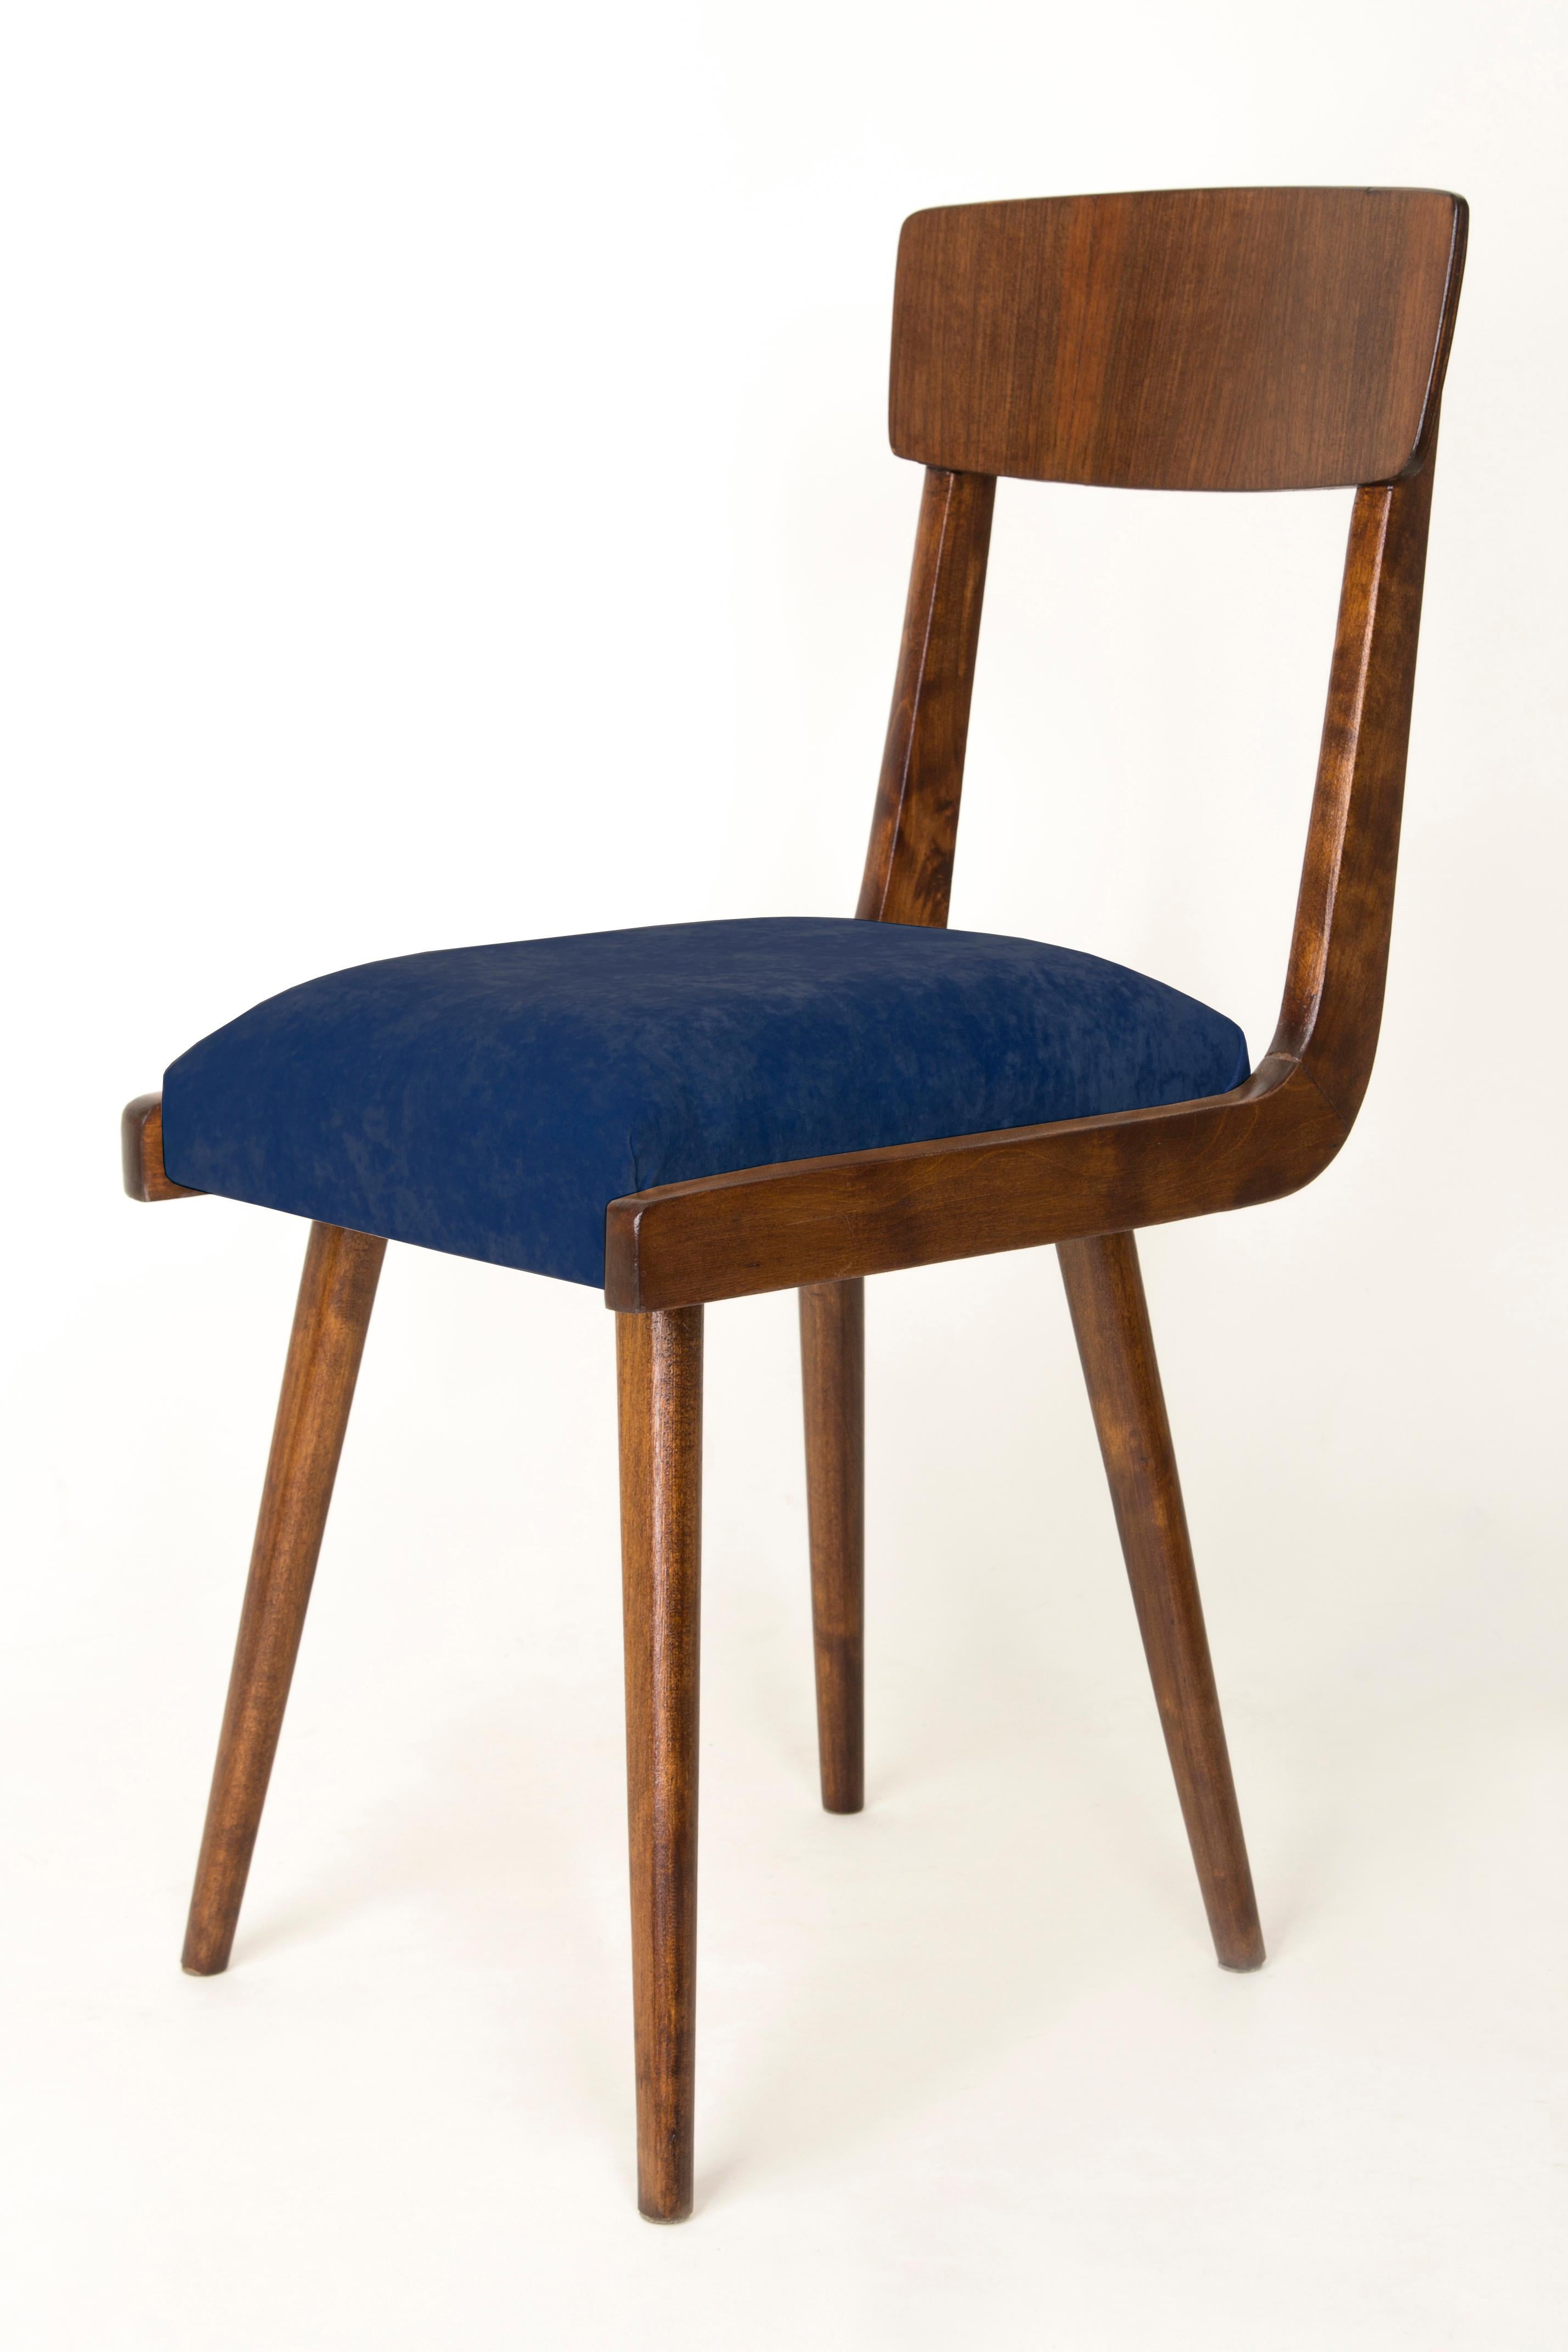 Mid-Century Modern Set of Four Mid Century Navy Blue Velvet Wood Chairs, Europe, 1960s For Sale